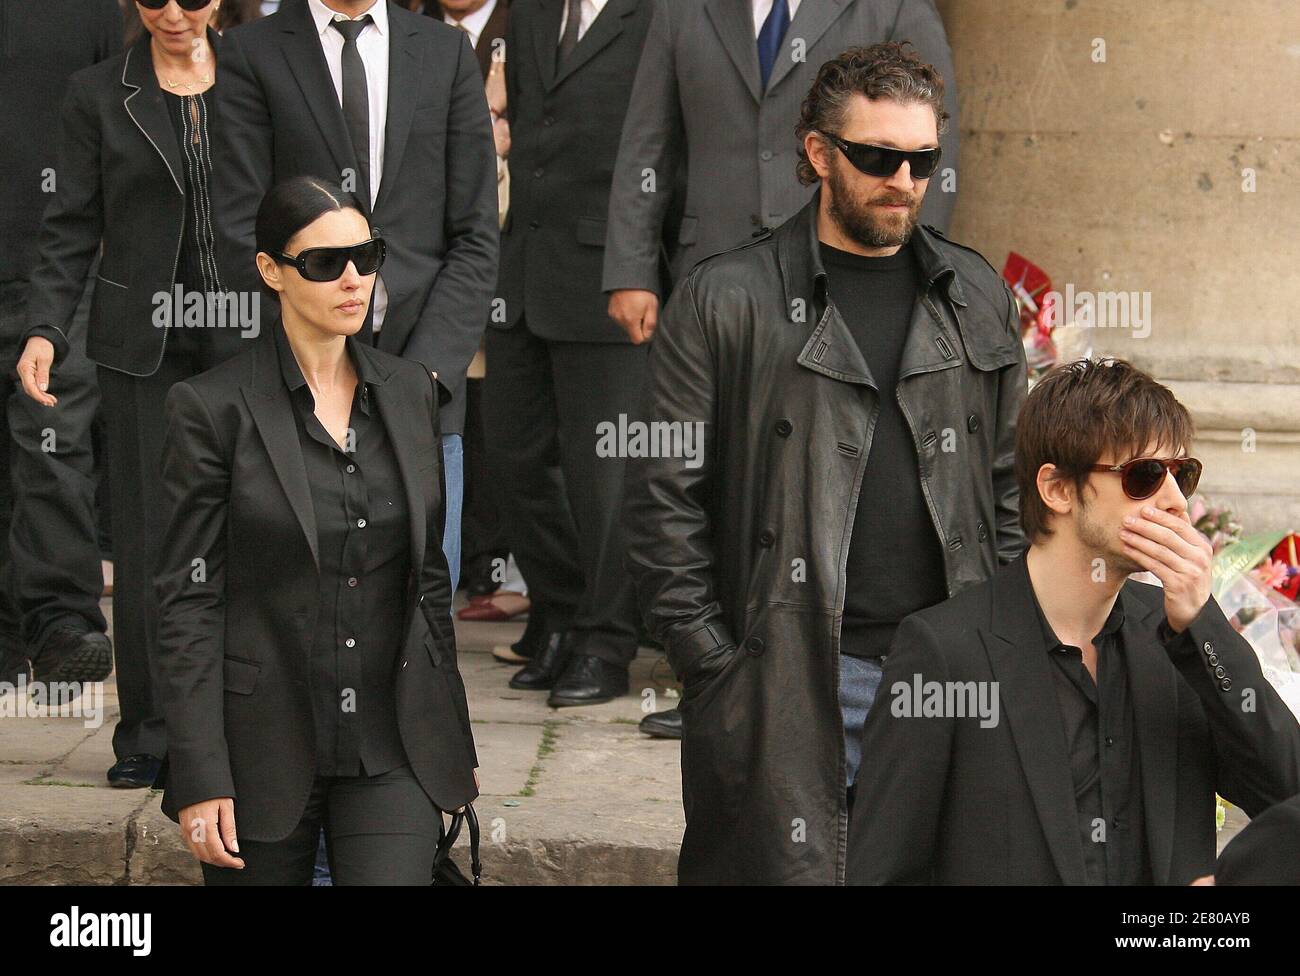 Monica Bellucci, Vincent Cassel and Gaspard Ulliel during the funeral  service of his father French actor Jean-Pierre Cassel at Saint-Eustache  church in Paris, France on April 26, 2007. Cassel died of cancer